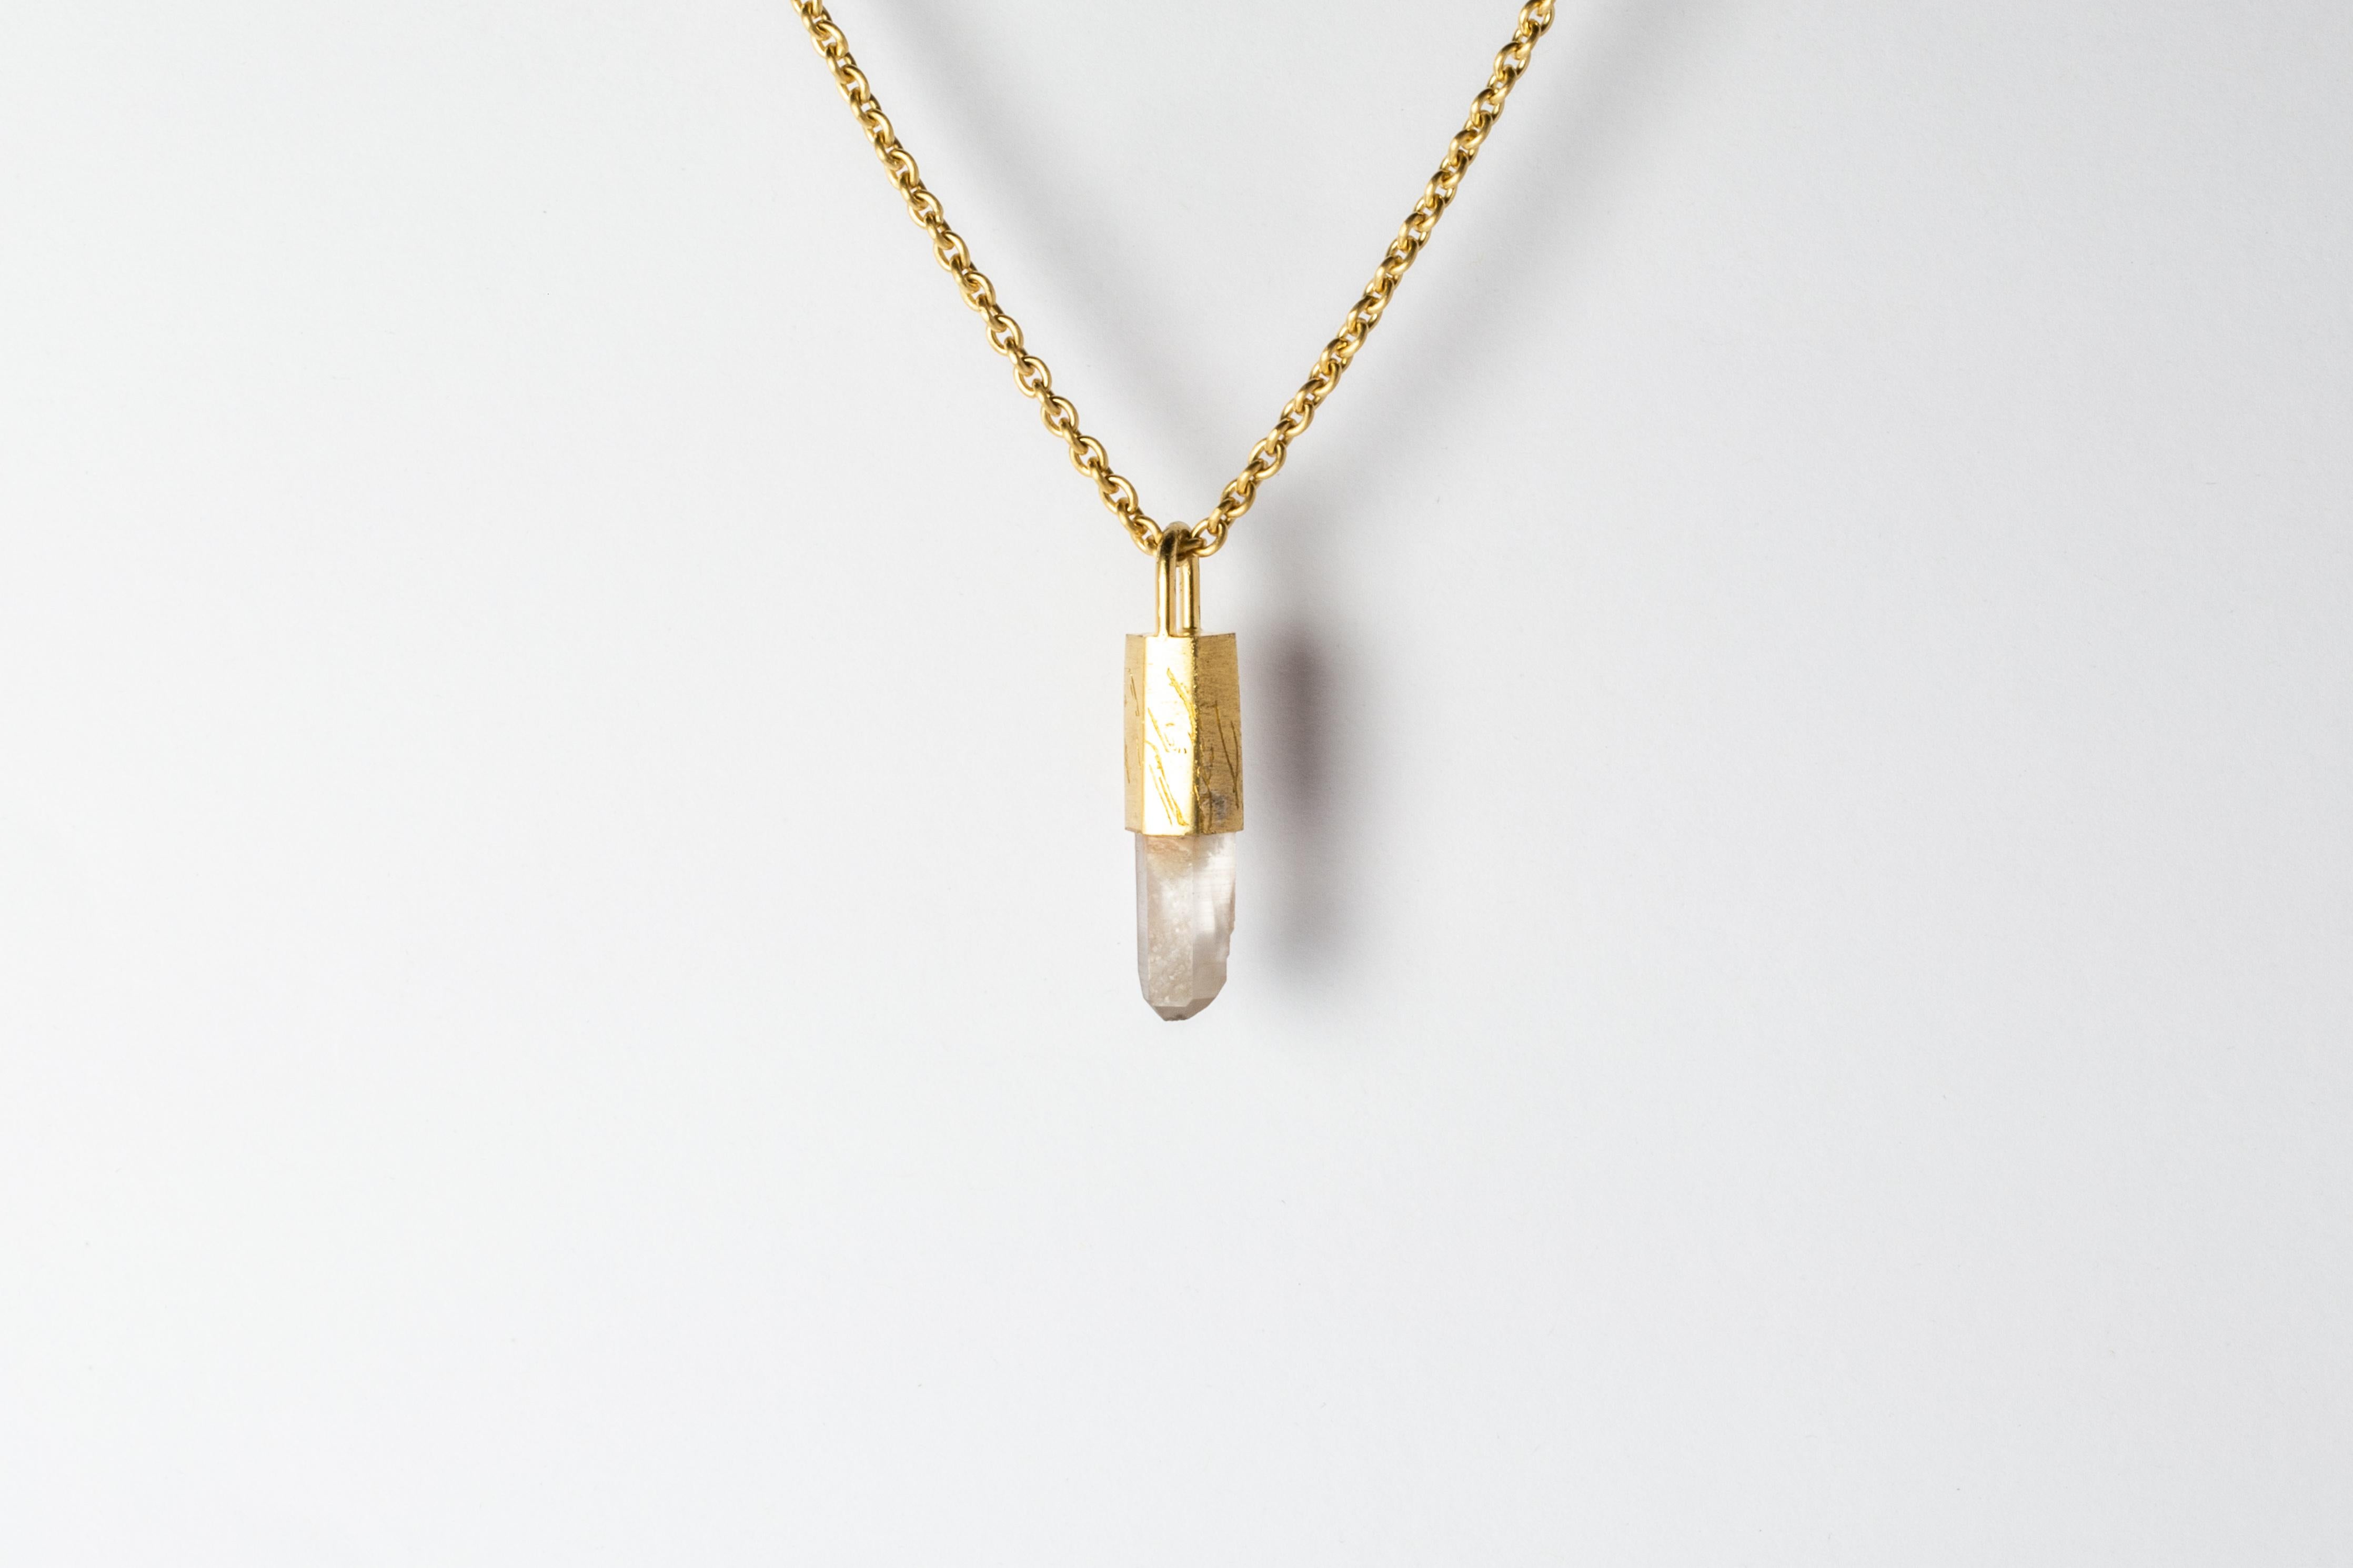 Pendant necklace in brass, sterling silver, and a rough of misc quartz. Brass and sterling silver are electroplated with 18k gold and then dipped into acid to create the subtly destroyed surface.
The Talisman series is an exploration into the power